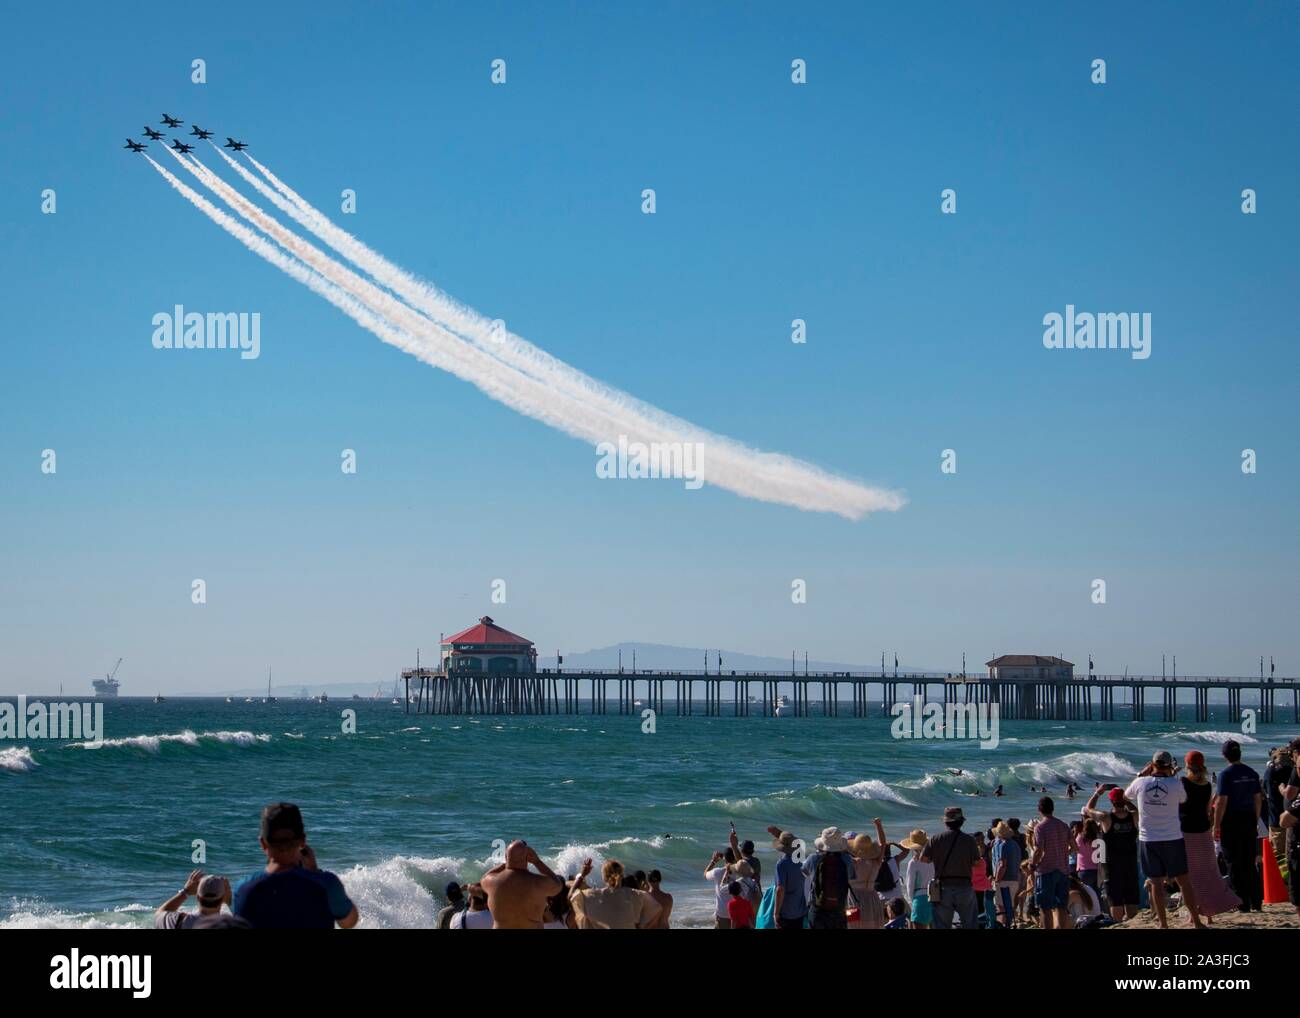 The U.S. Air Force Thunderbirds Air Demonstration Squadron swoop over the famous Huntington Beach Pier during a flyover at the Great Pacific Air Show October 6, 2019 in Huntington Beach, California. Stock Photo